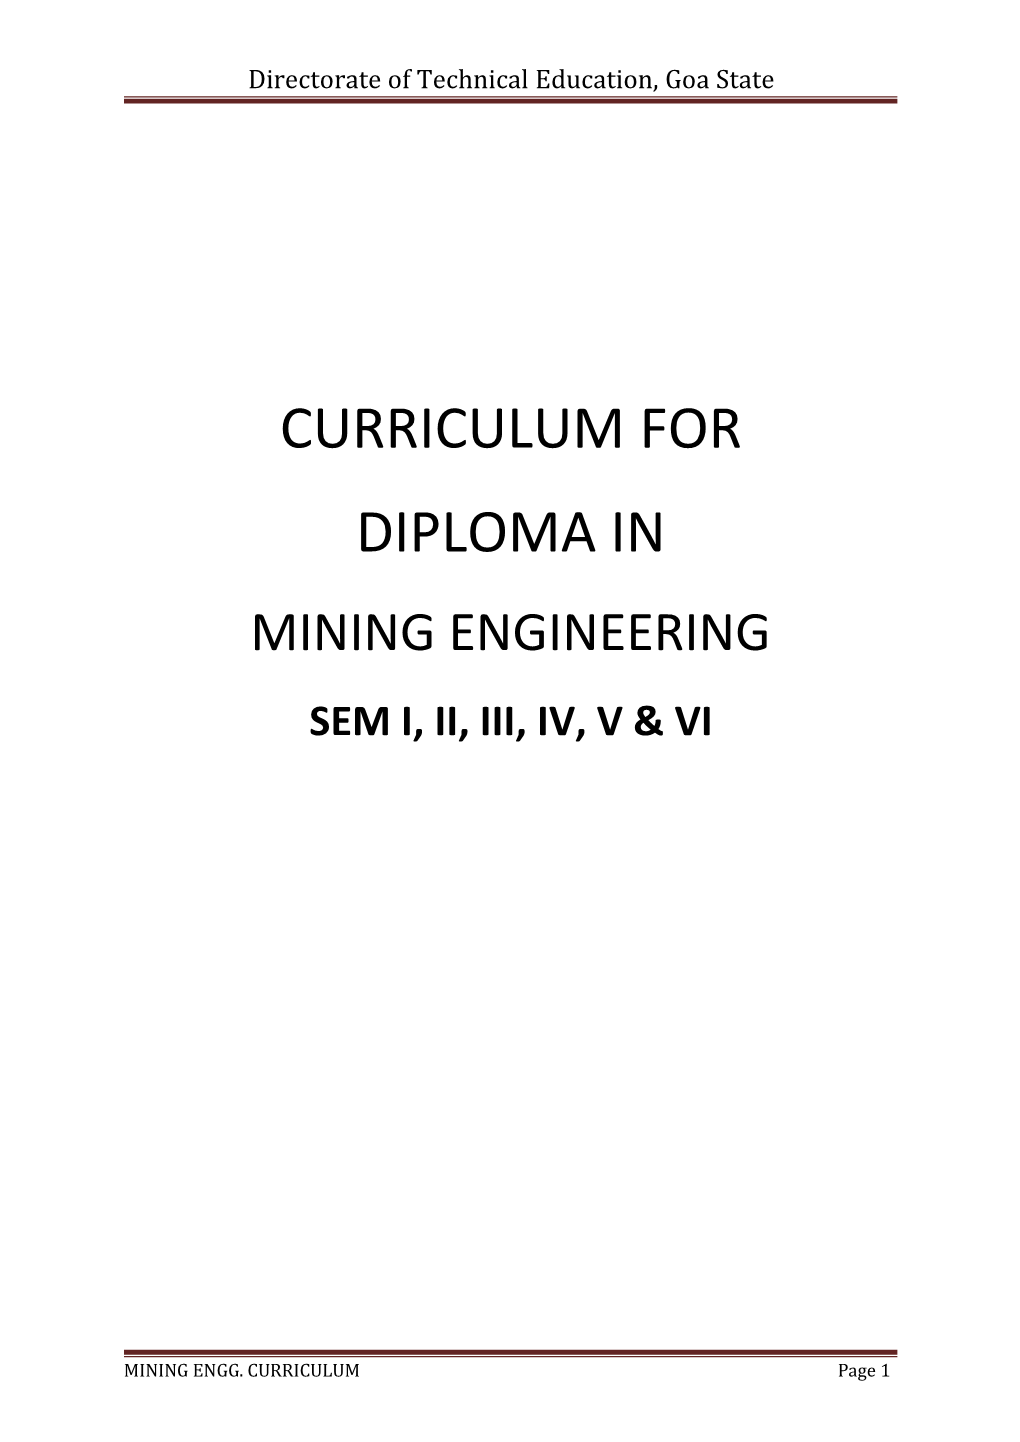 D:\Curriculum for Website\Final Revised